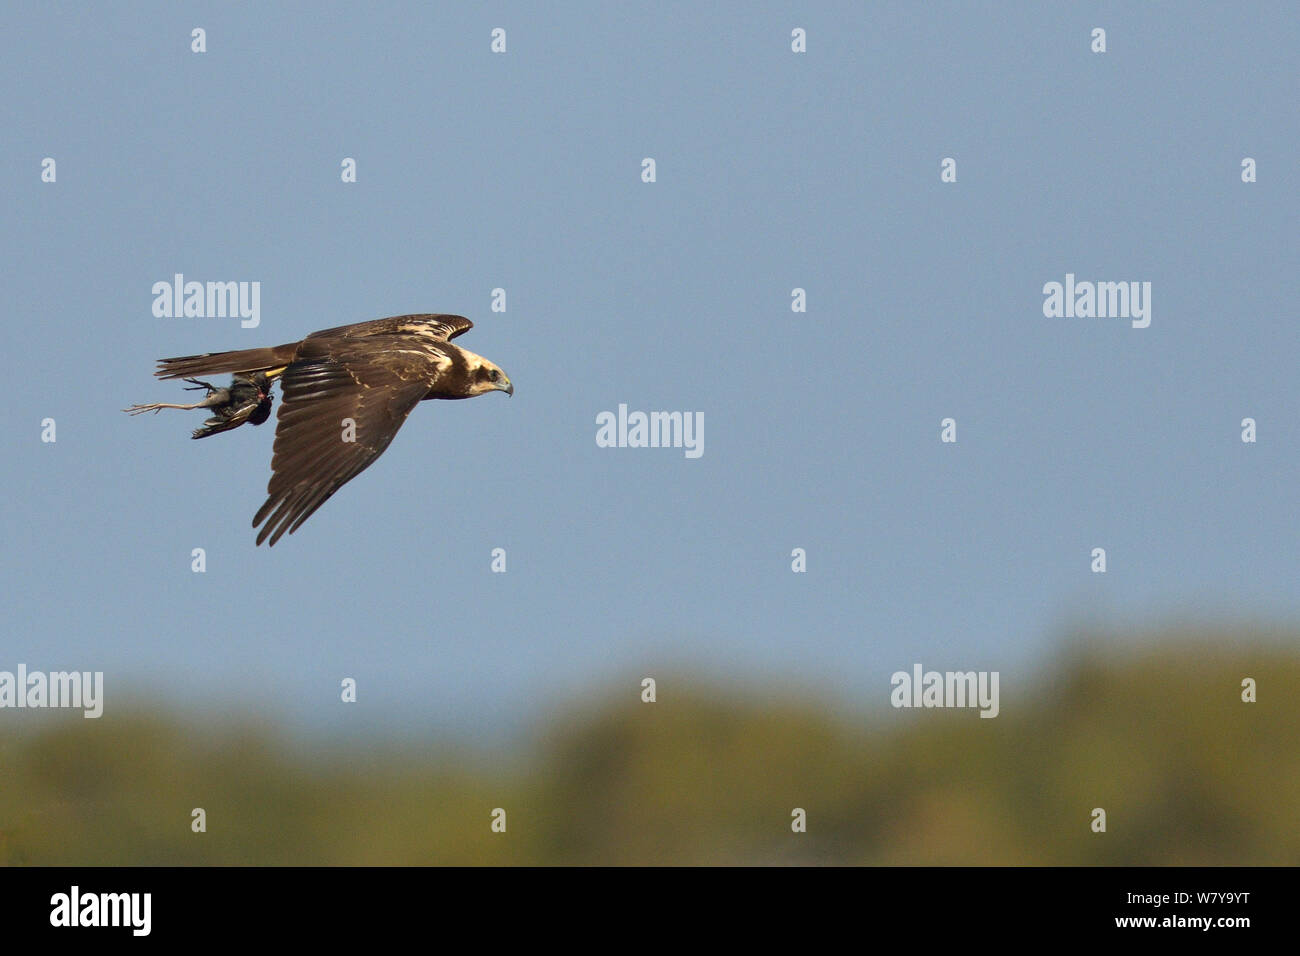 Western marsh harrier (Circus aeruginosus) flying with prey in talons, Le Teich, Gironde, France, October Stock Photo